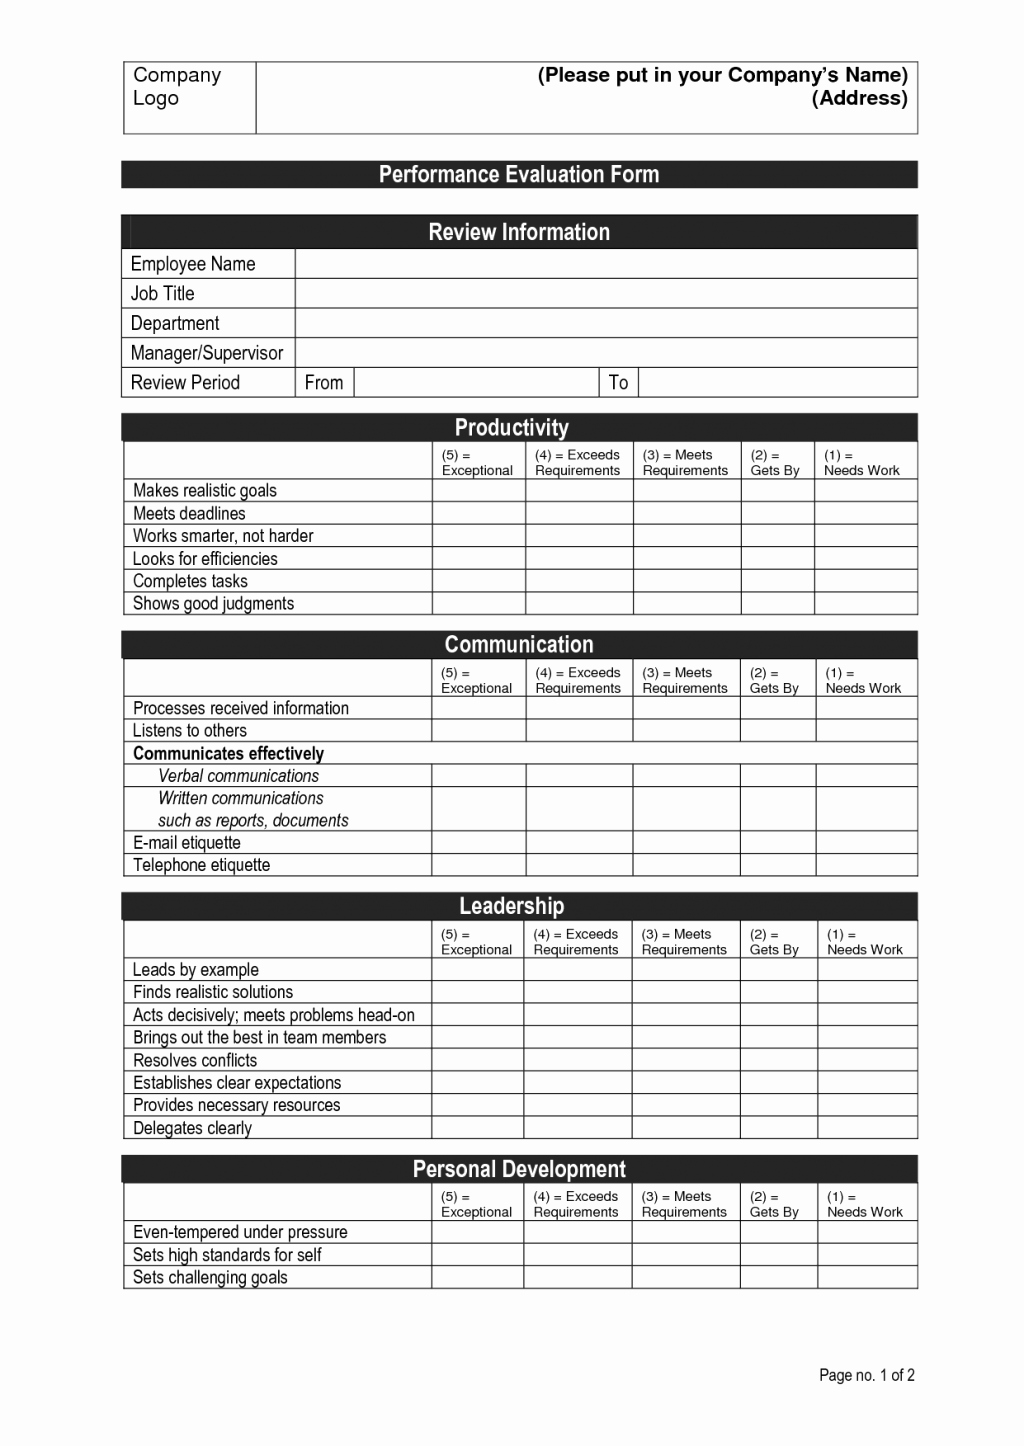 Customer Service Performance Review Template Inspirational Employee Performance Review Template Doc Evaluation form